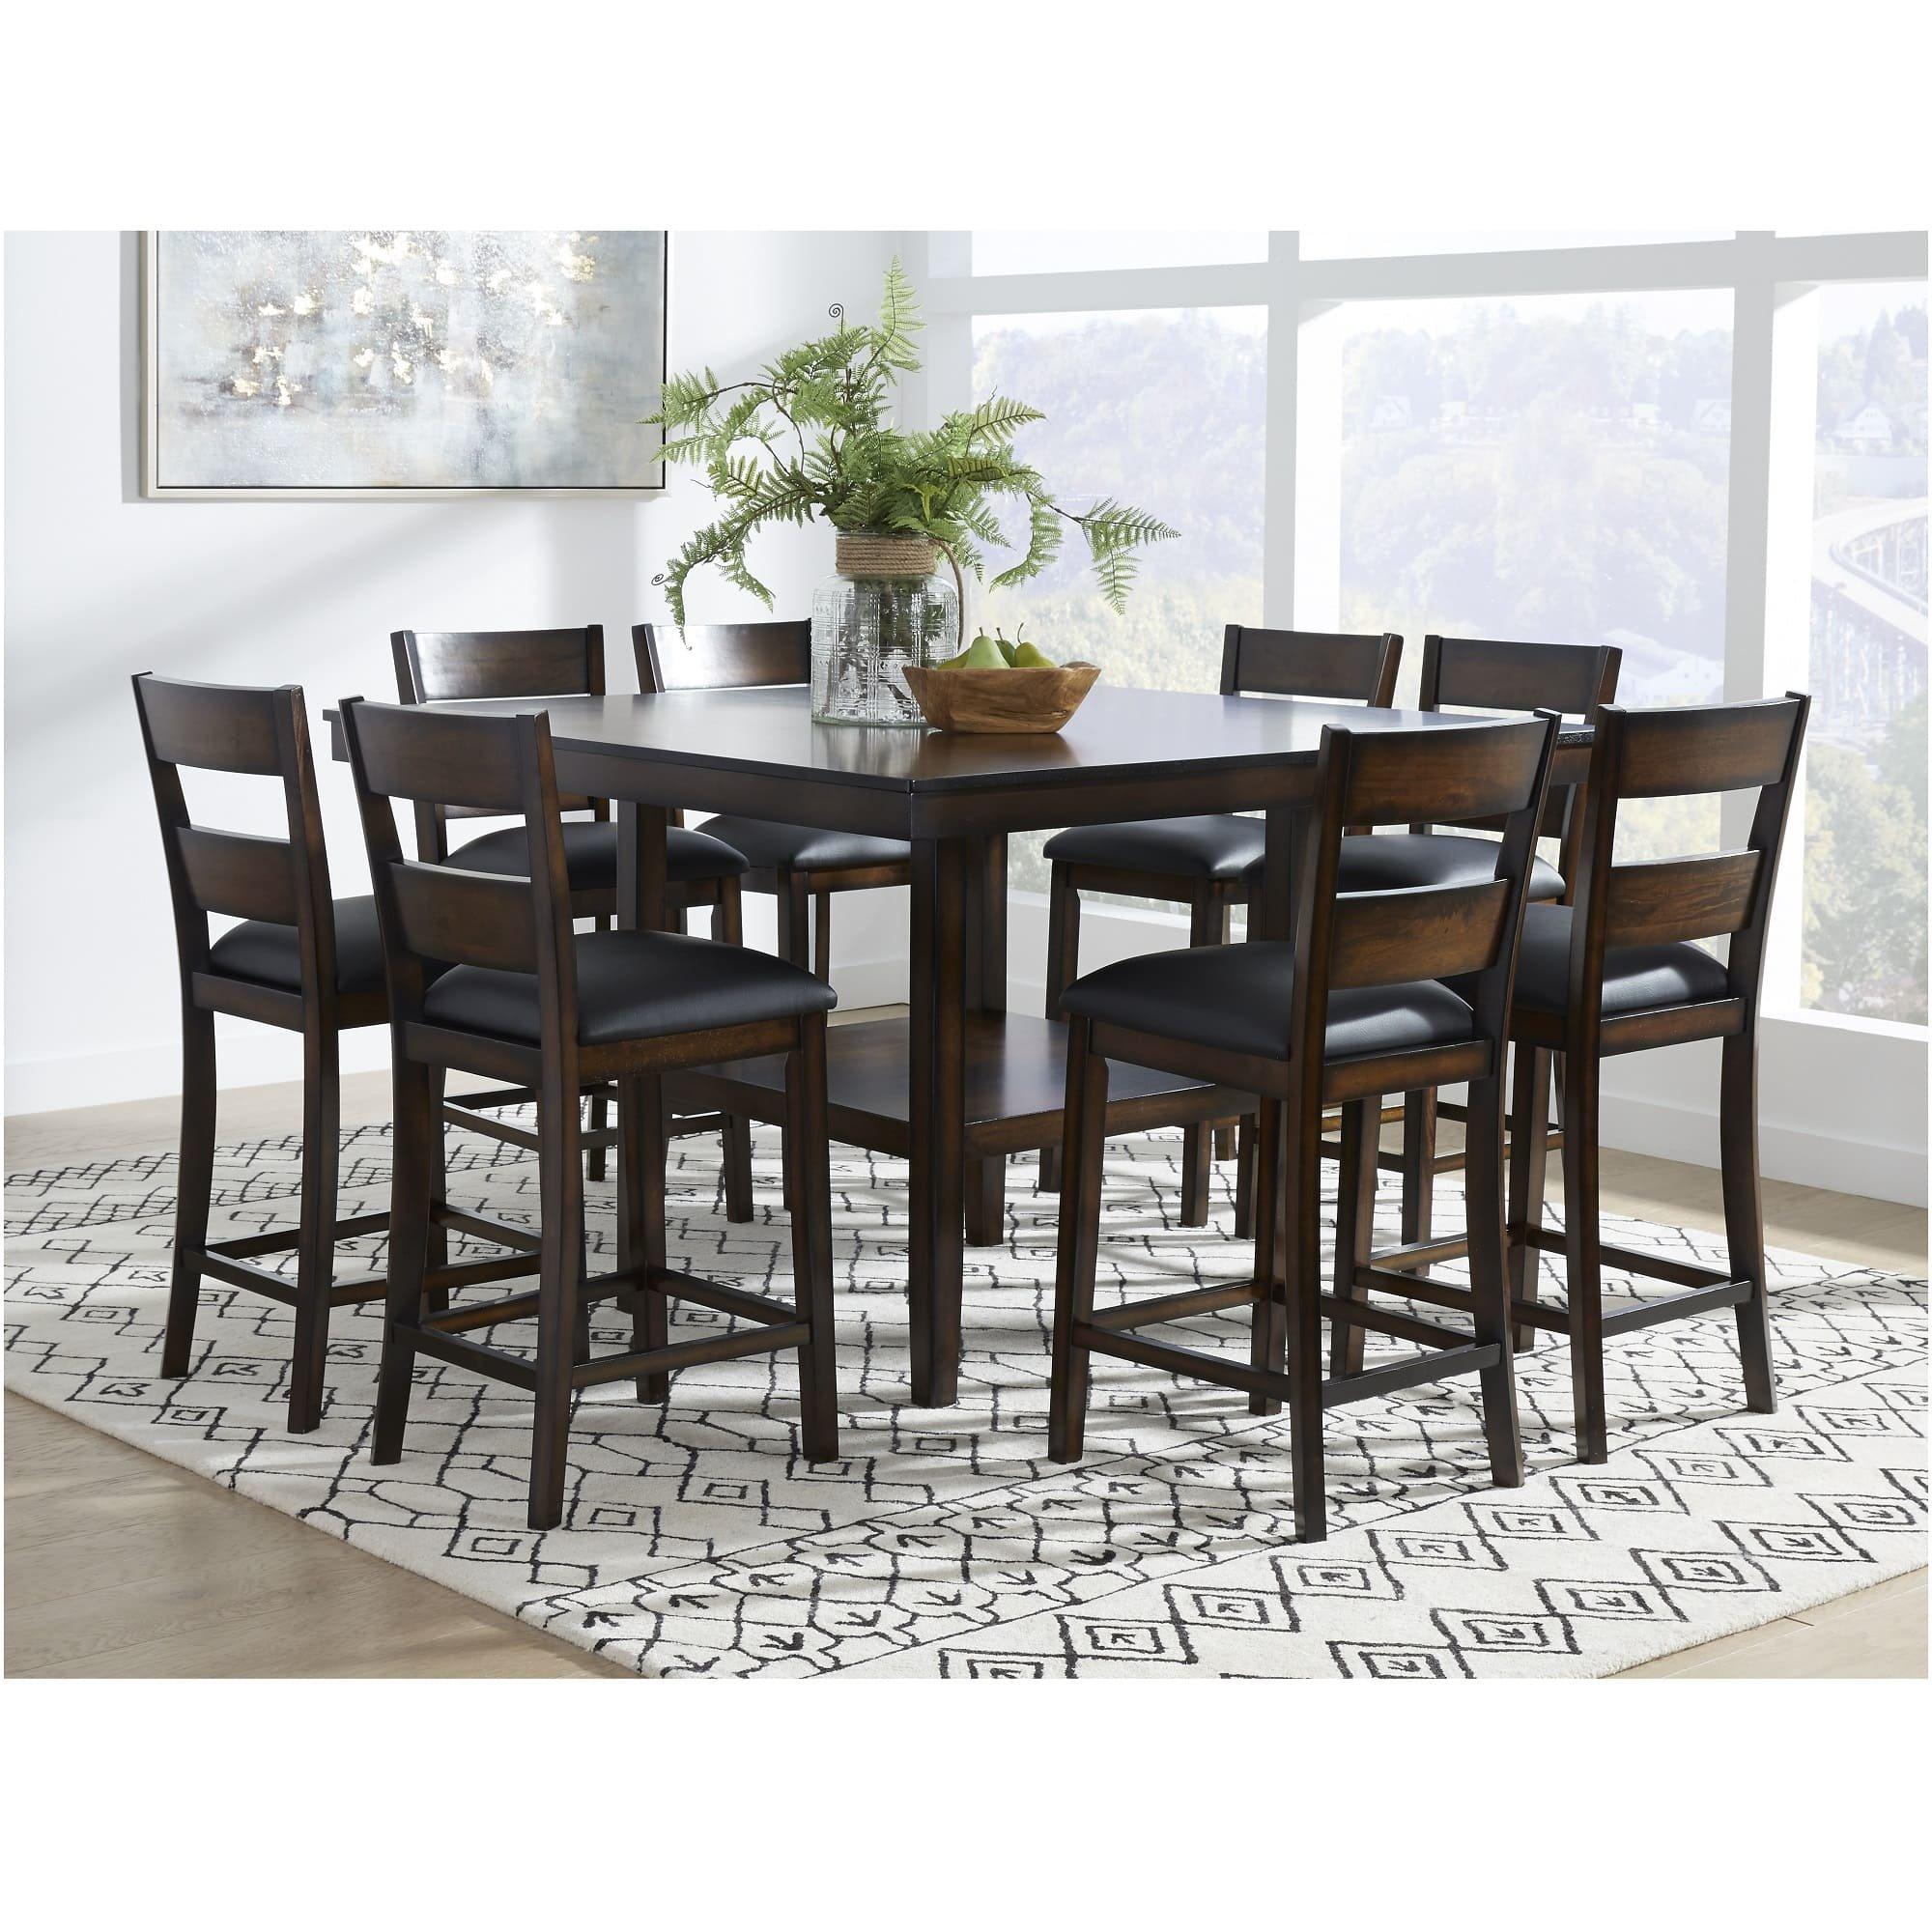 9 Piece Delaney Counter Height Dining Room Collection?$large$